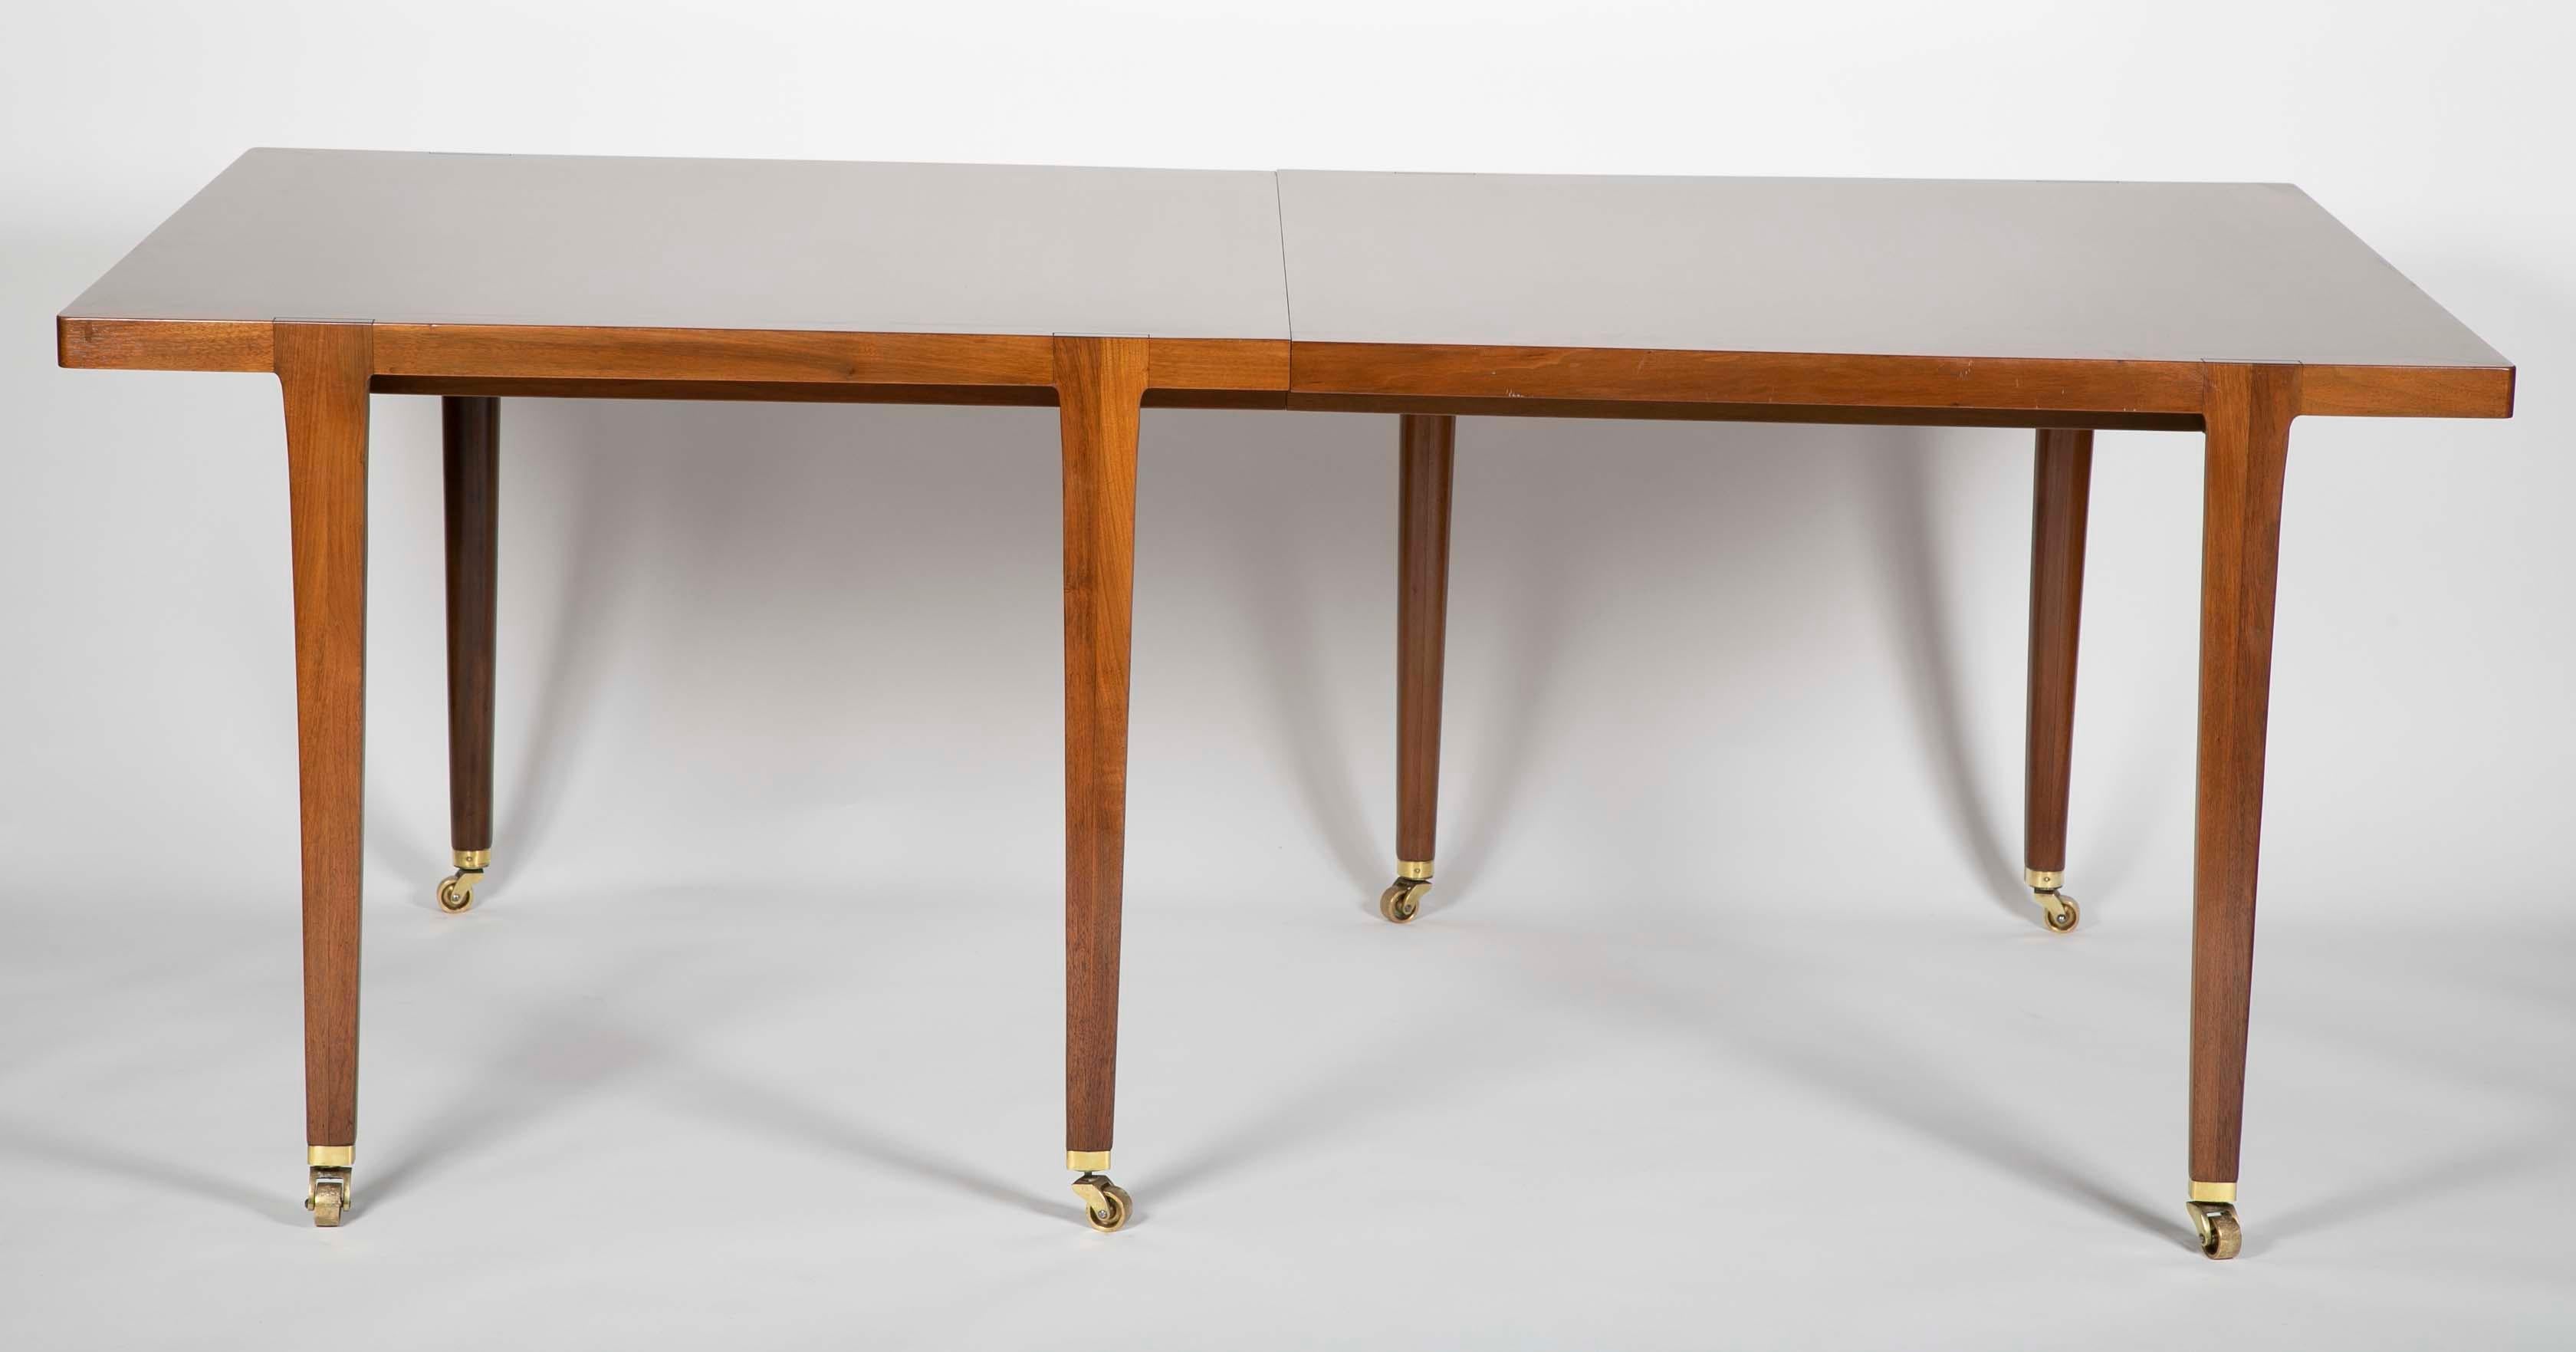 A Modern dining table designed by Edward Wormley for Dunbar. Walnut with brass casters. The table comes with two 18